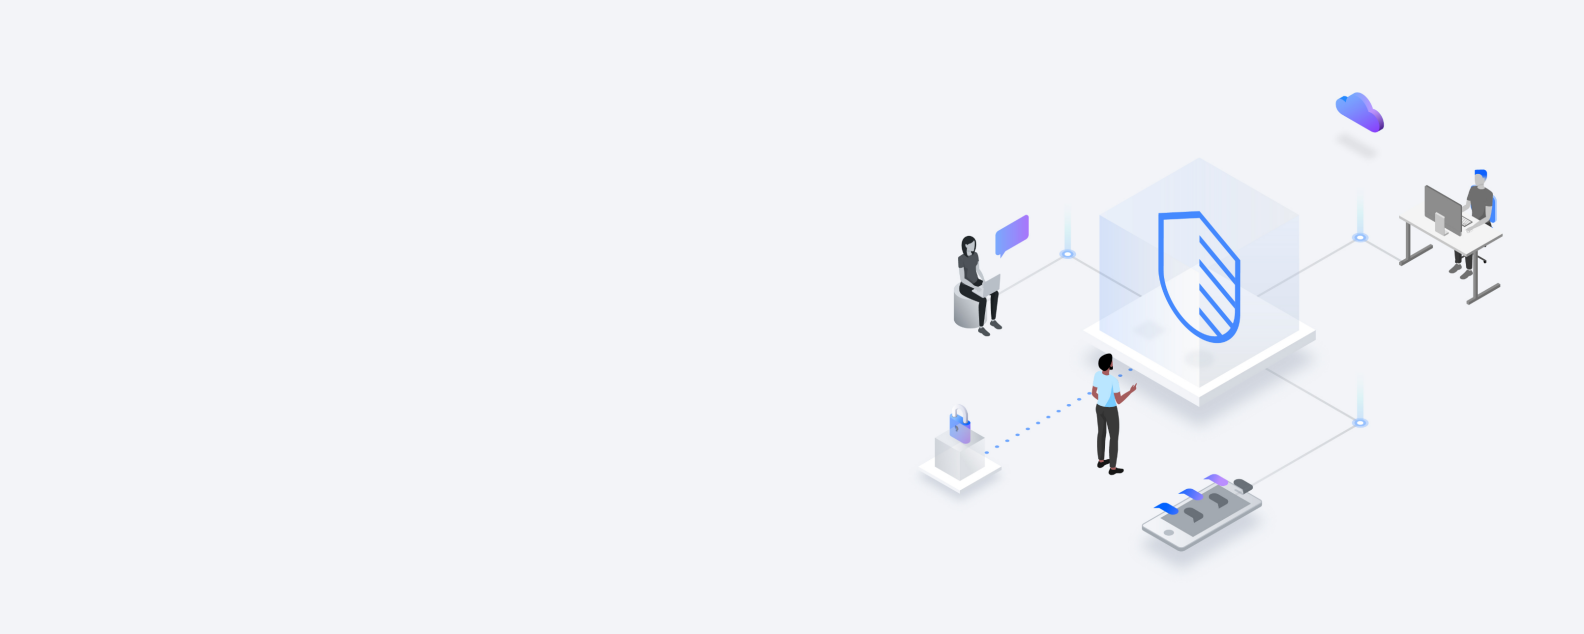 Isometric drawing showing different office personnel, all using IBM Security